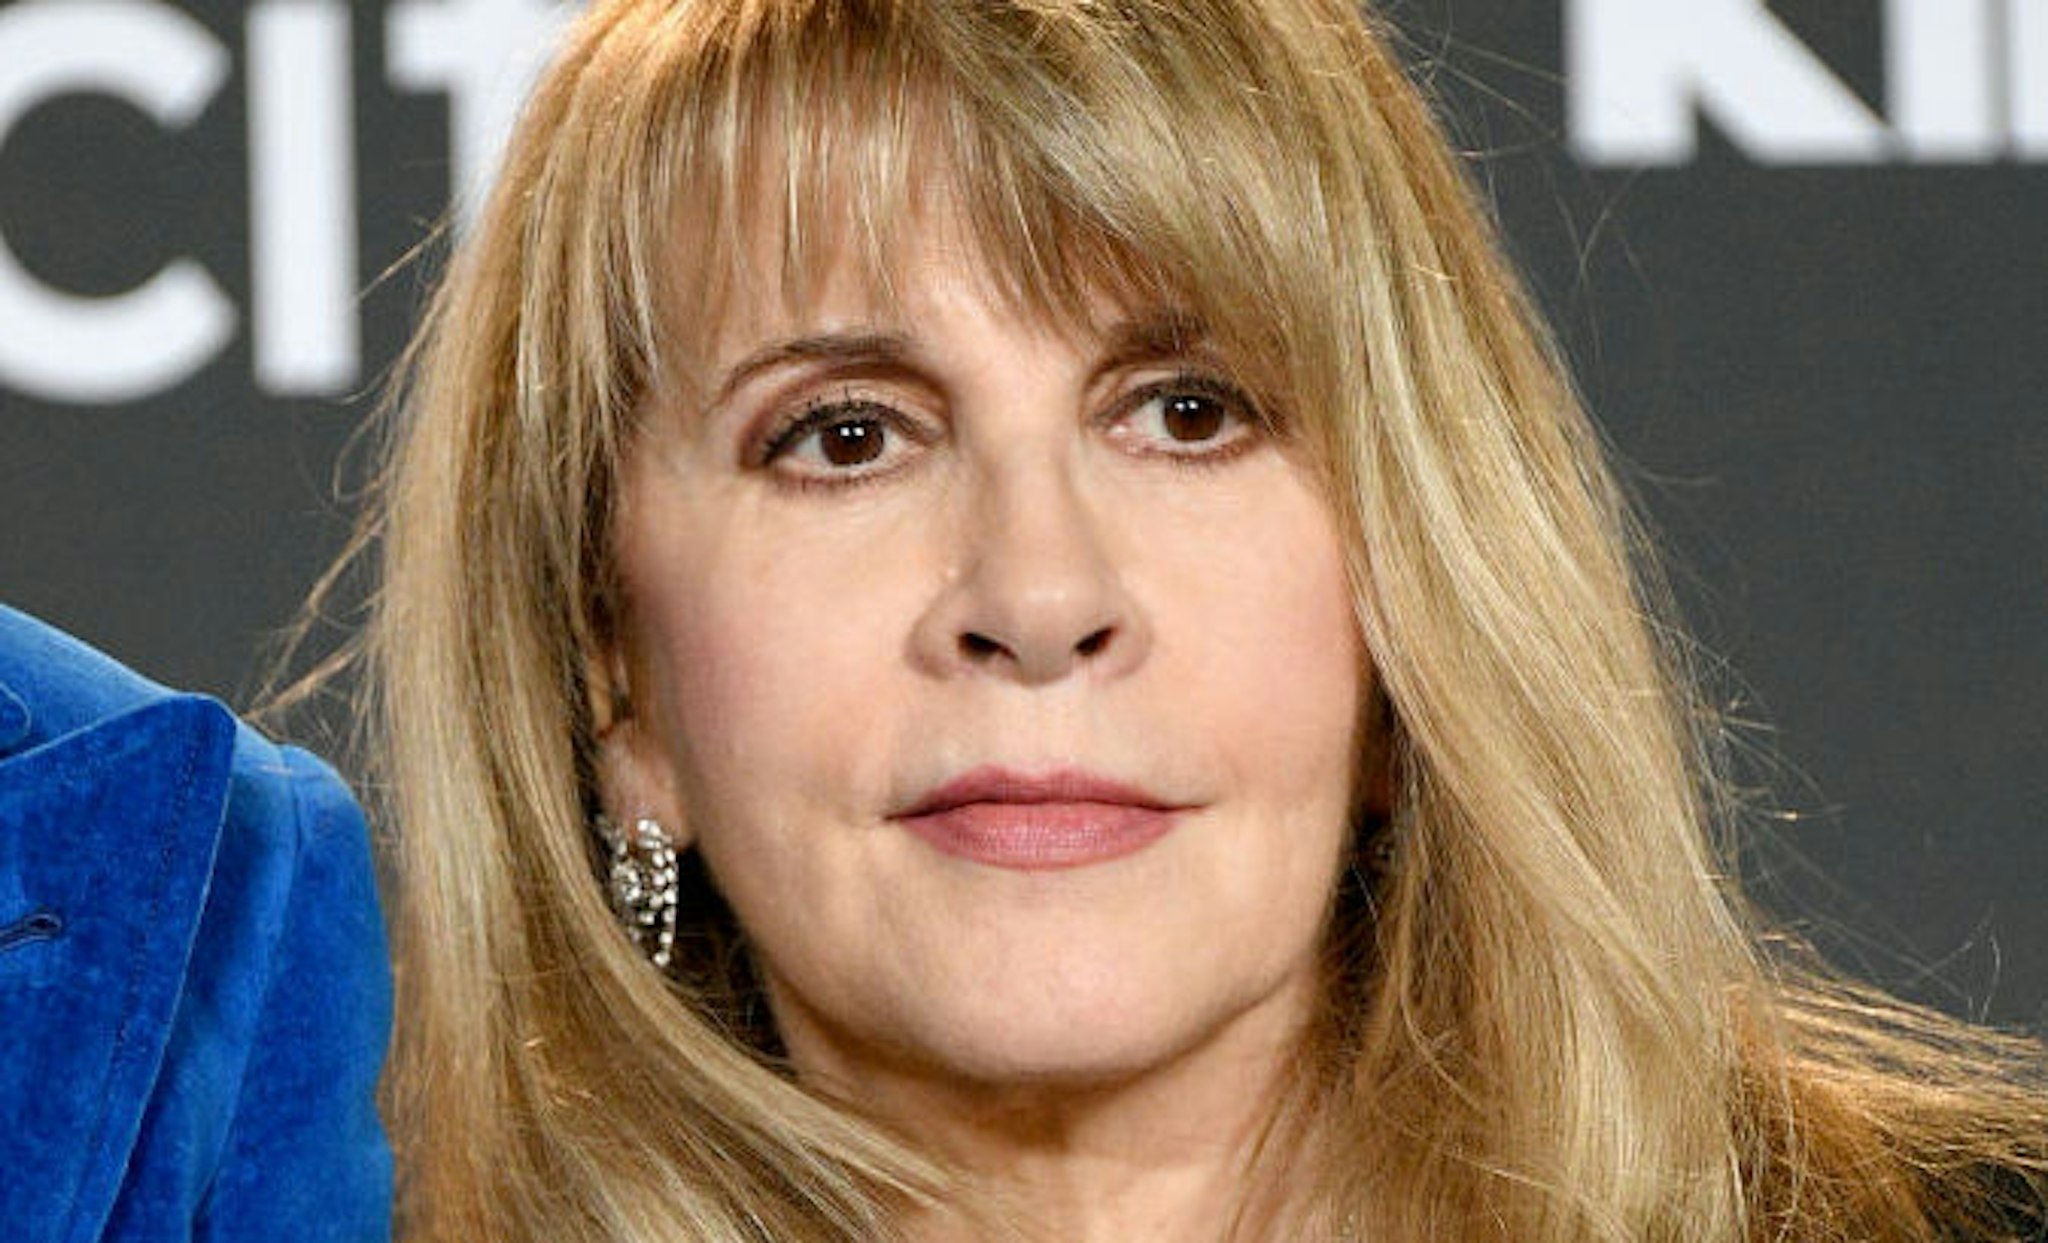 Inductee Stevie Nicks poses in the press room at the 2019 Rock & Roll Hall Of Fame Induction Ceremony - Press Room at Barclays Center on March 29, 2019 in New York City.